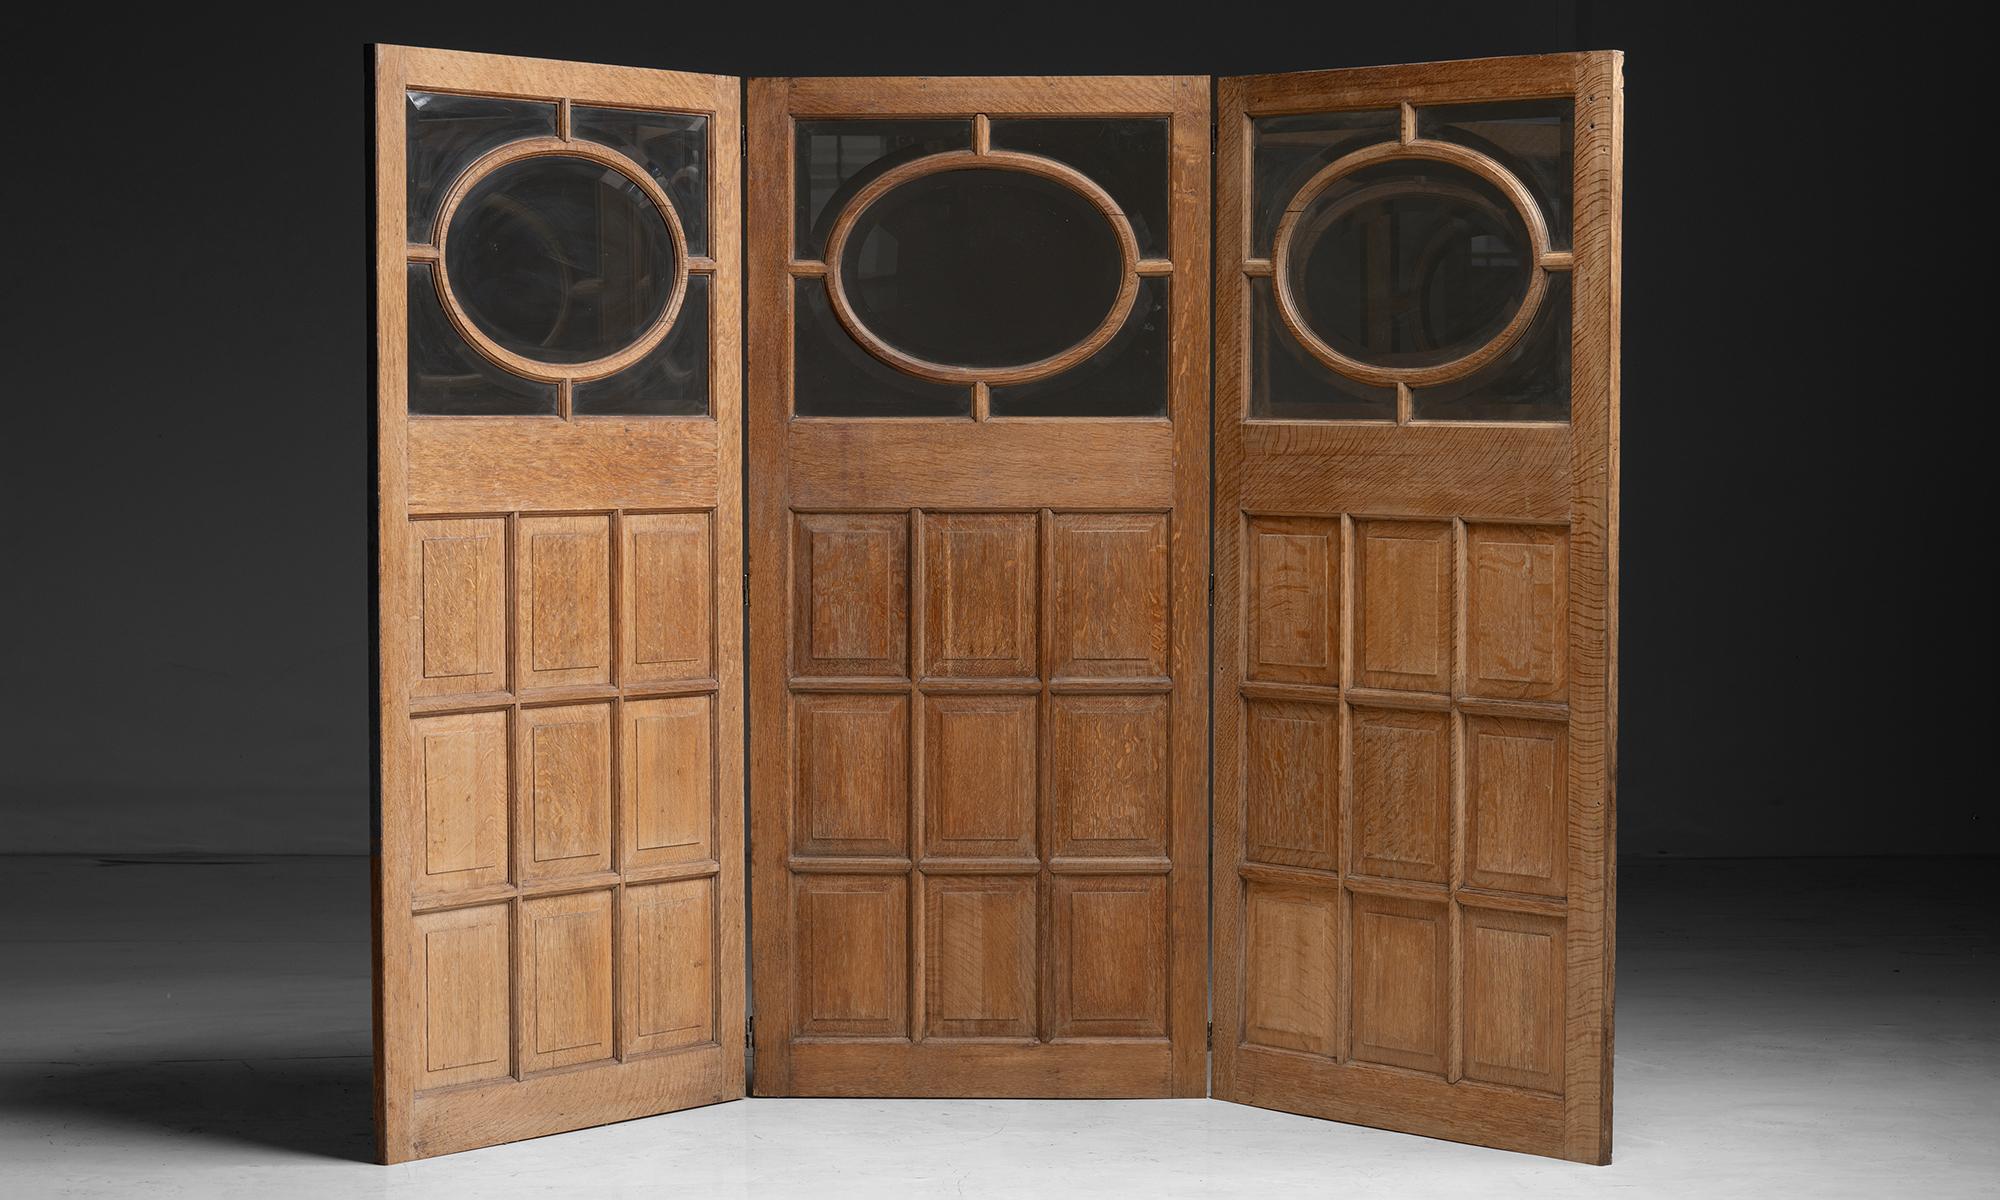 Oak & Glass Room Divider

England circa 1890

Paneled oak doors with beveled glass and brass hardware.

99